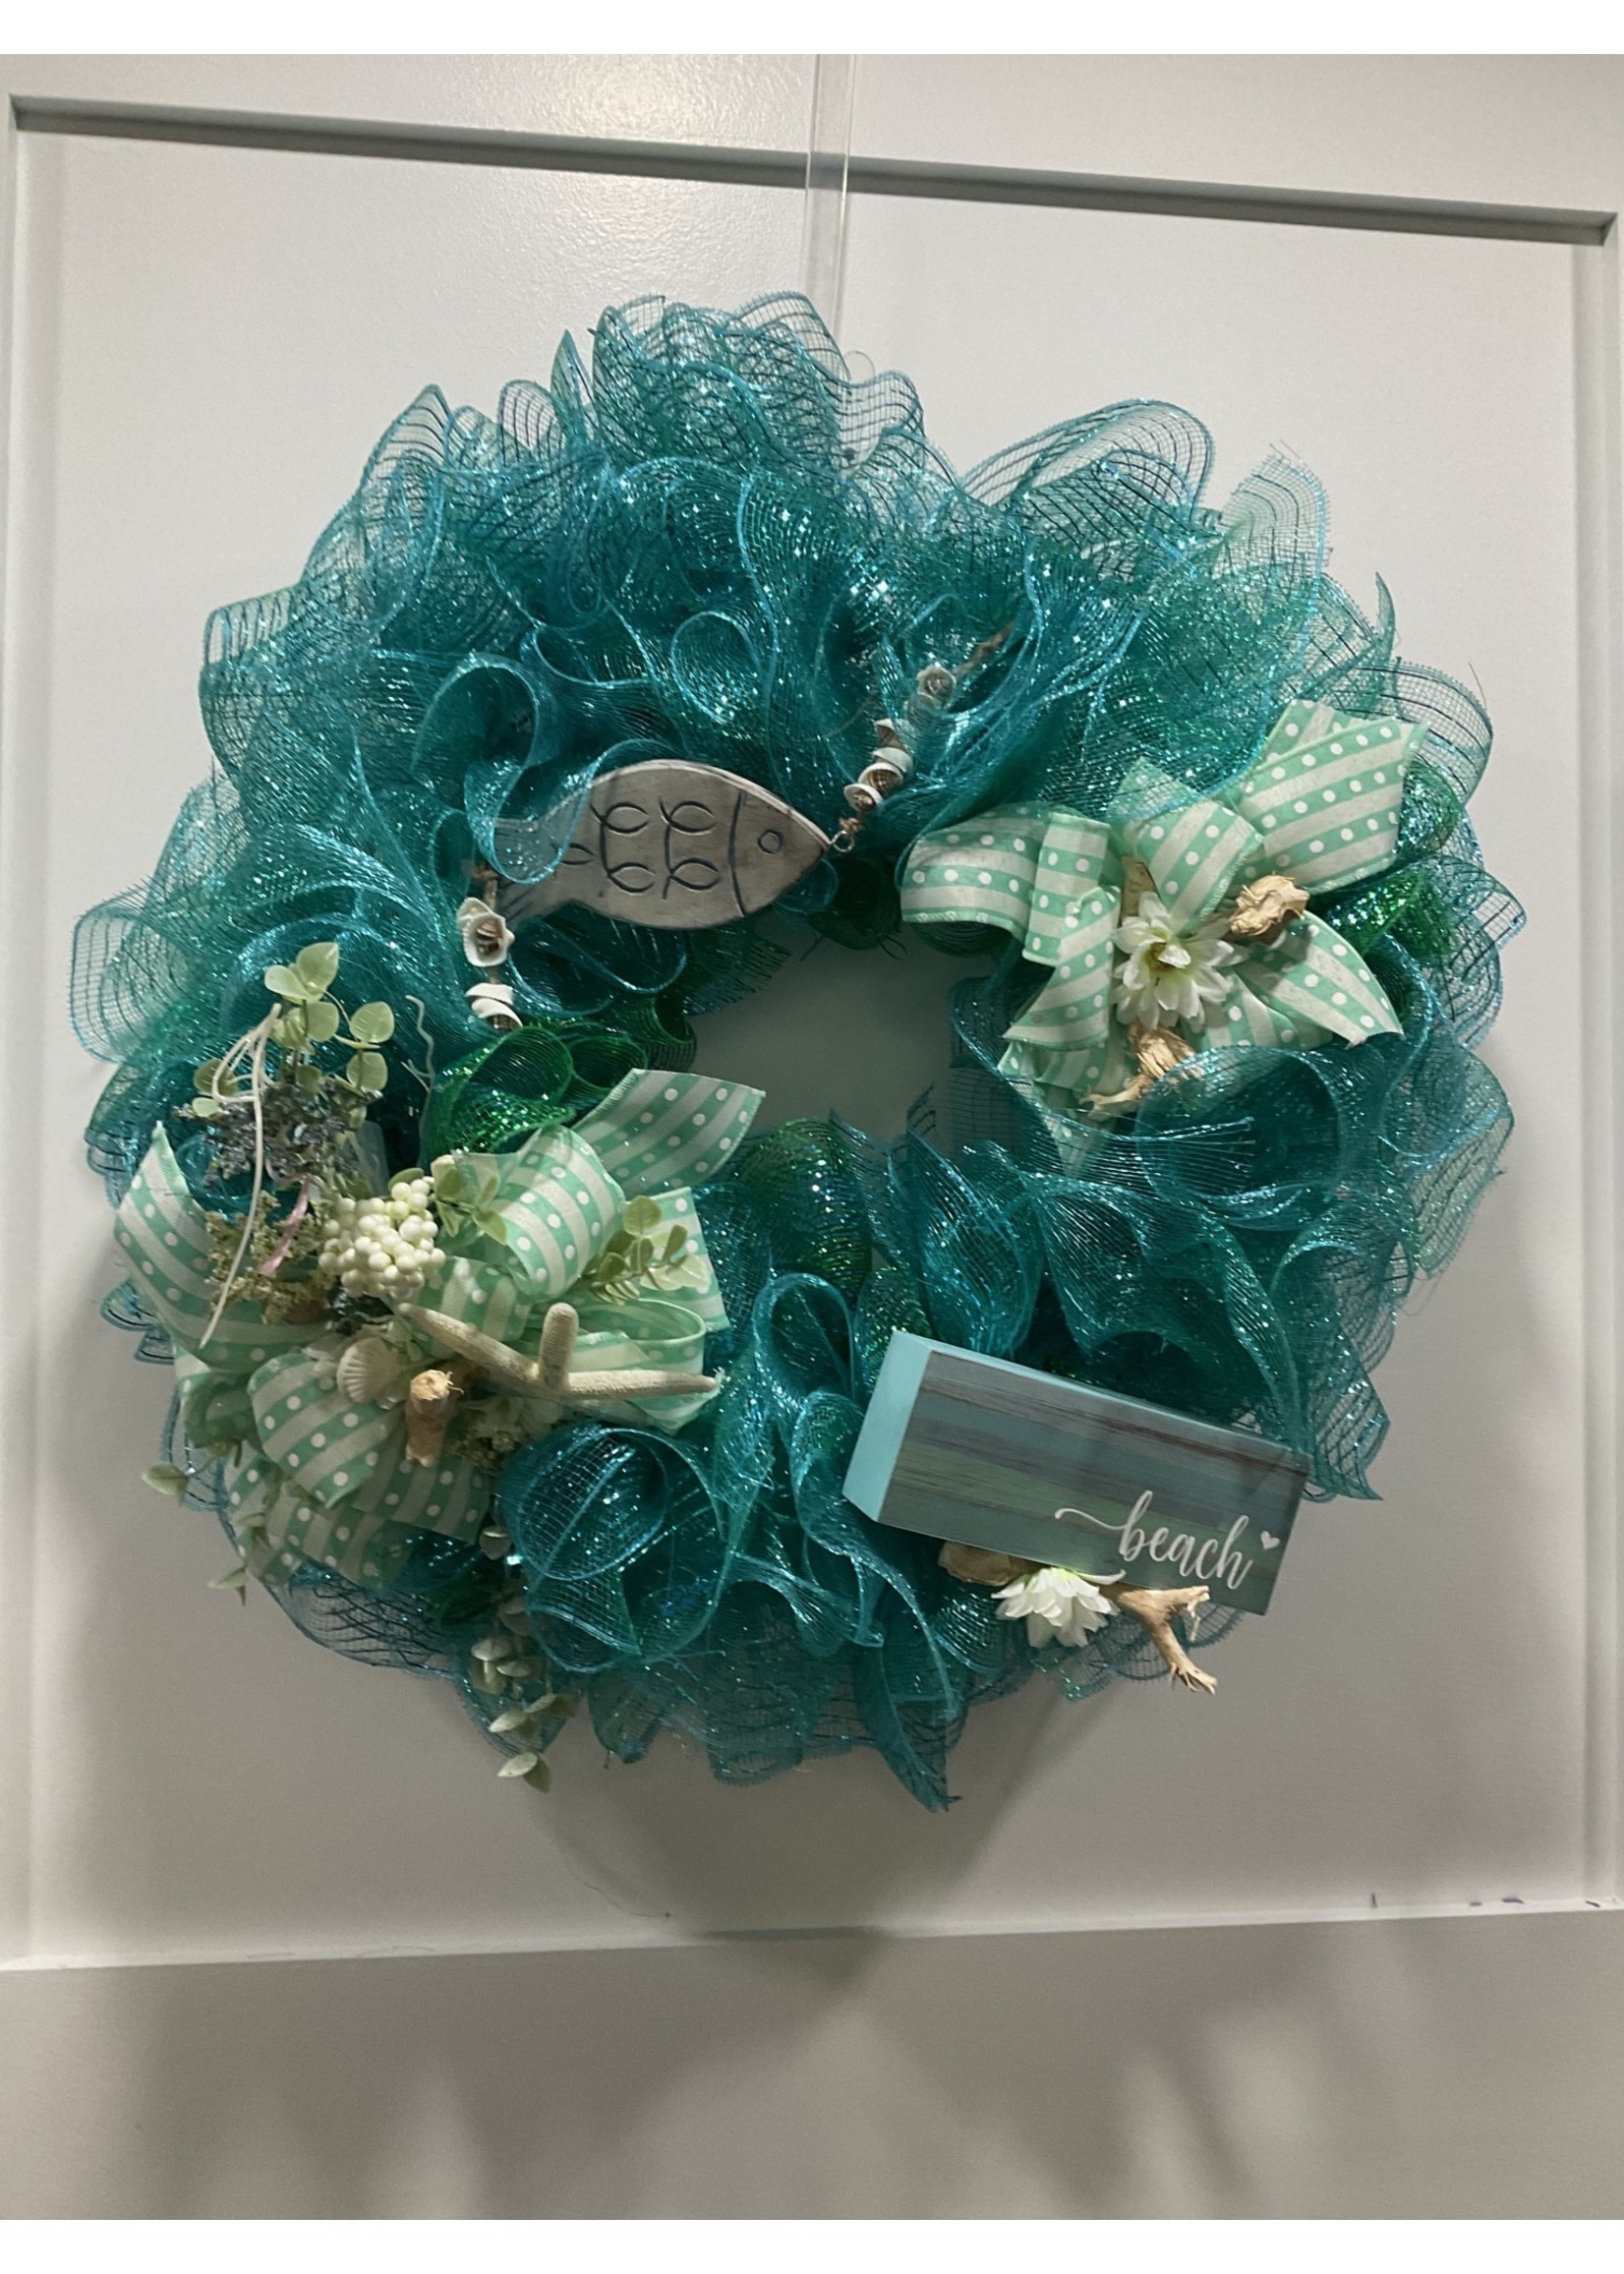 My New Favorite Thing Wreath Mesh 24 in-Aqua "Beach" w/Fish and Green Dotted Ribbon and Flowers